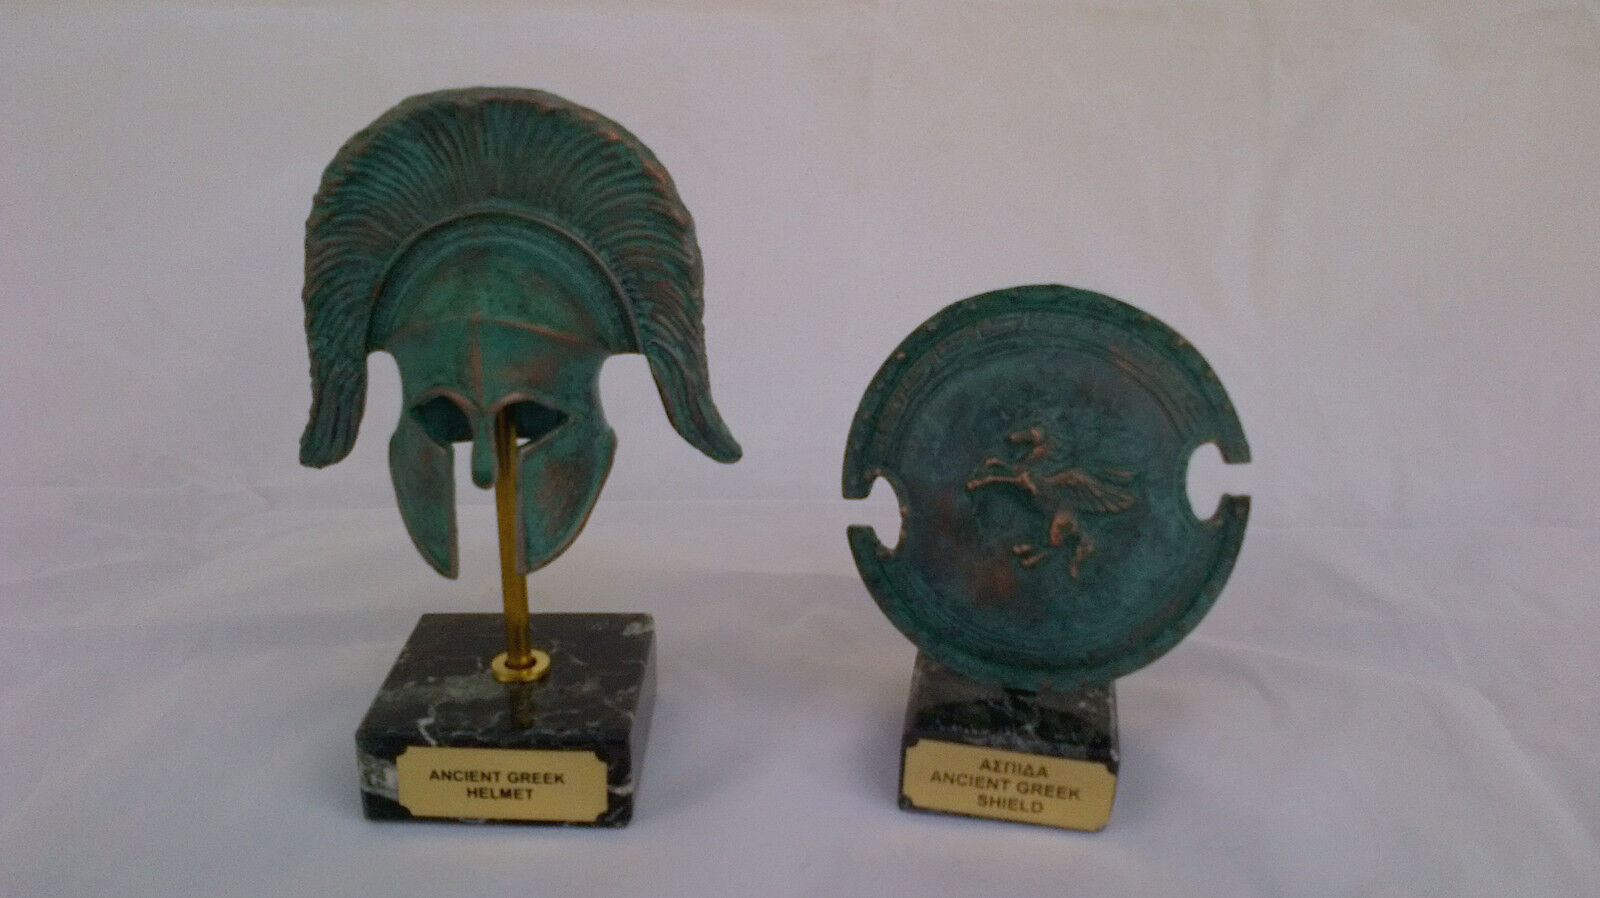 Helmet and Pegasus shield marble based clr-cpr/green artifacts